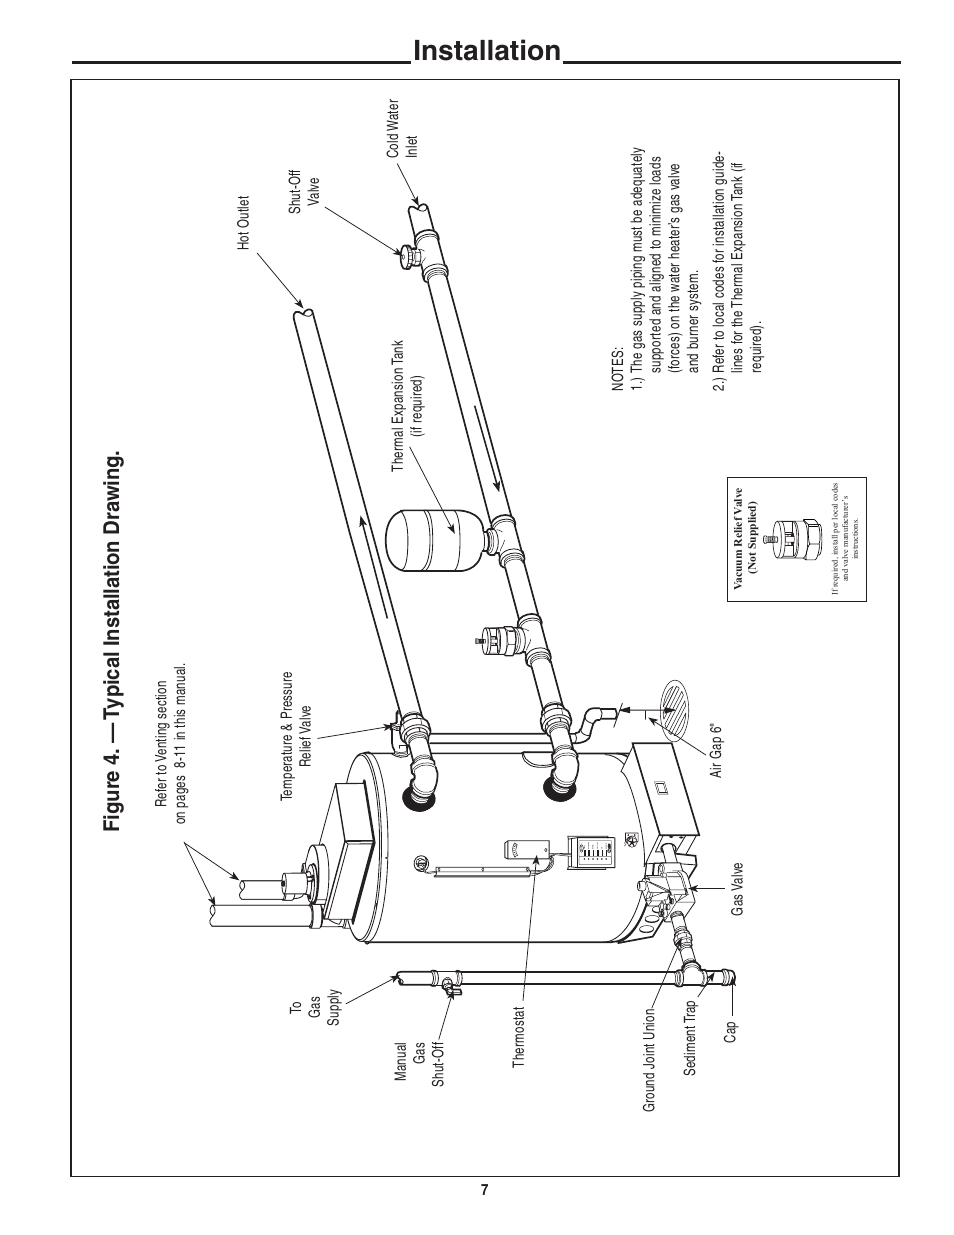 Installation | Rheem Commercial Power Direct Vent Water heater User Manual | Page 7 / 28